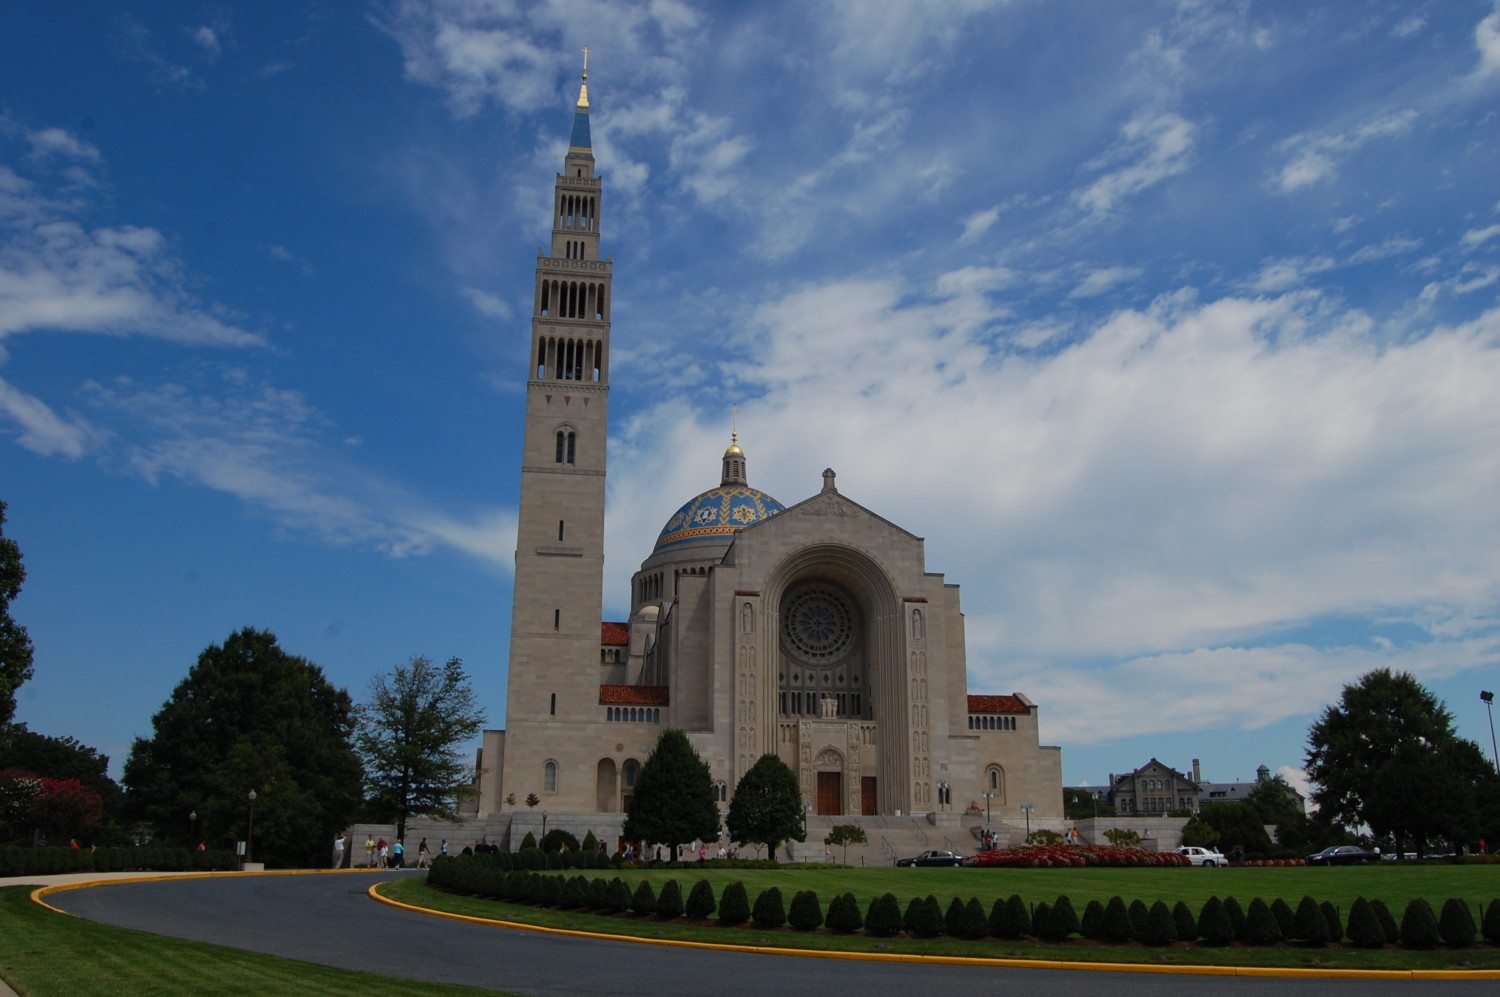 Basilica of the National Shrine of the Immaculate Conception photo